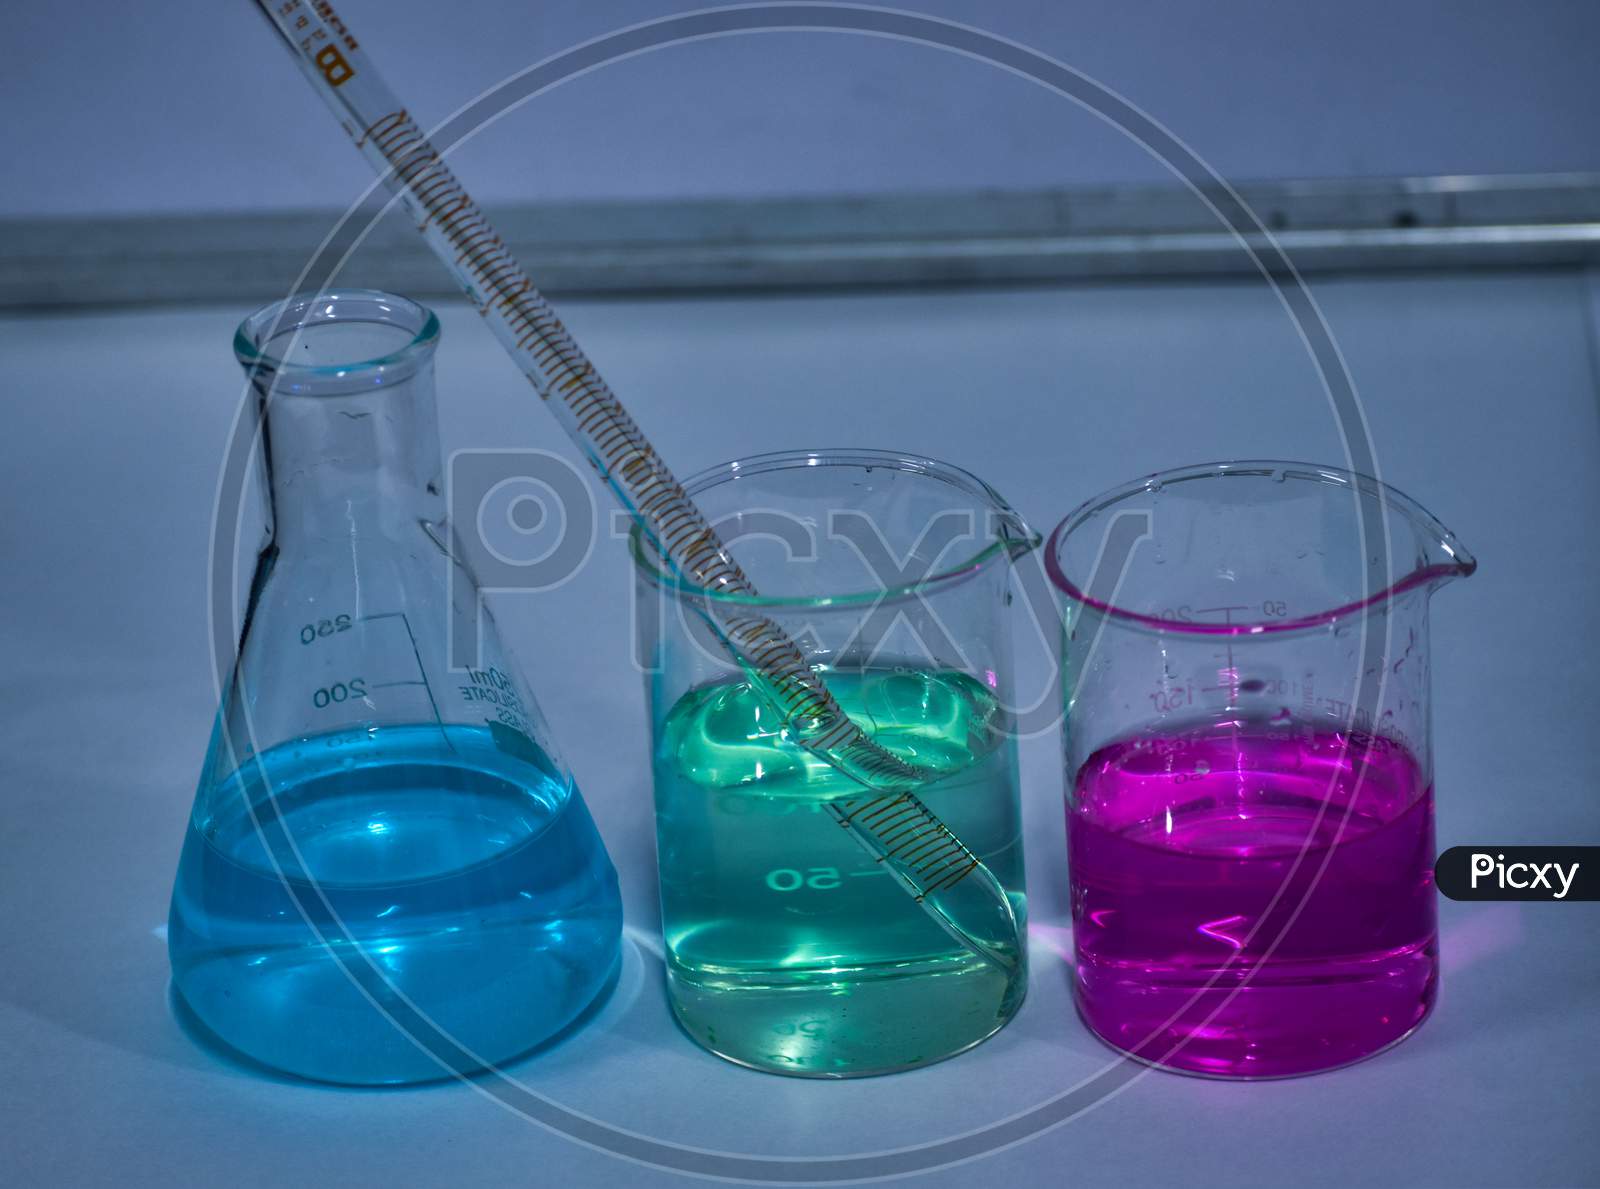 Chemistry Lab Apparatus With Color Solution, Beaker, Conical Flask